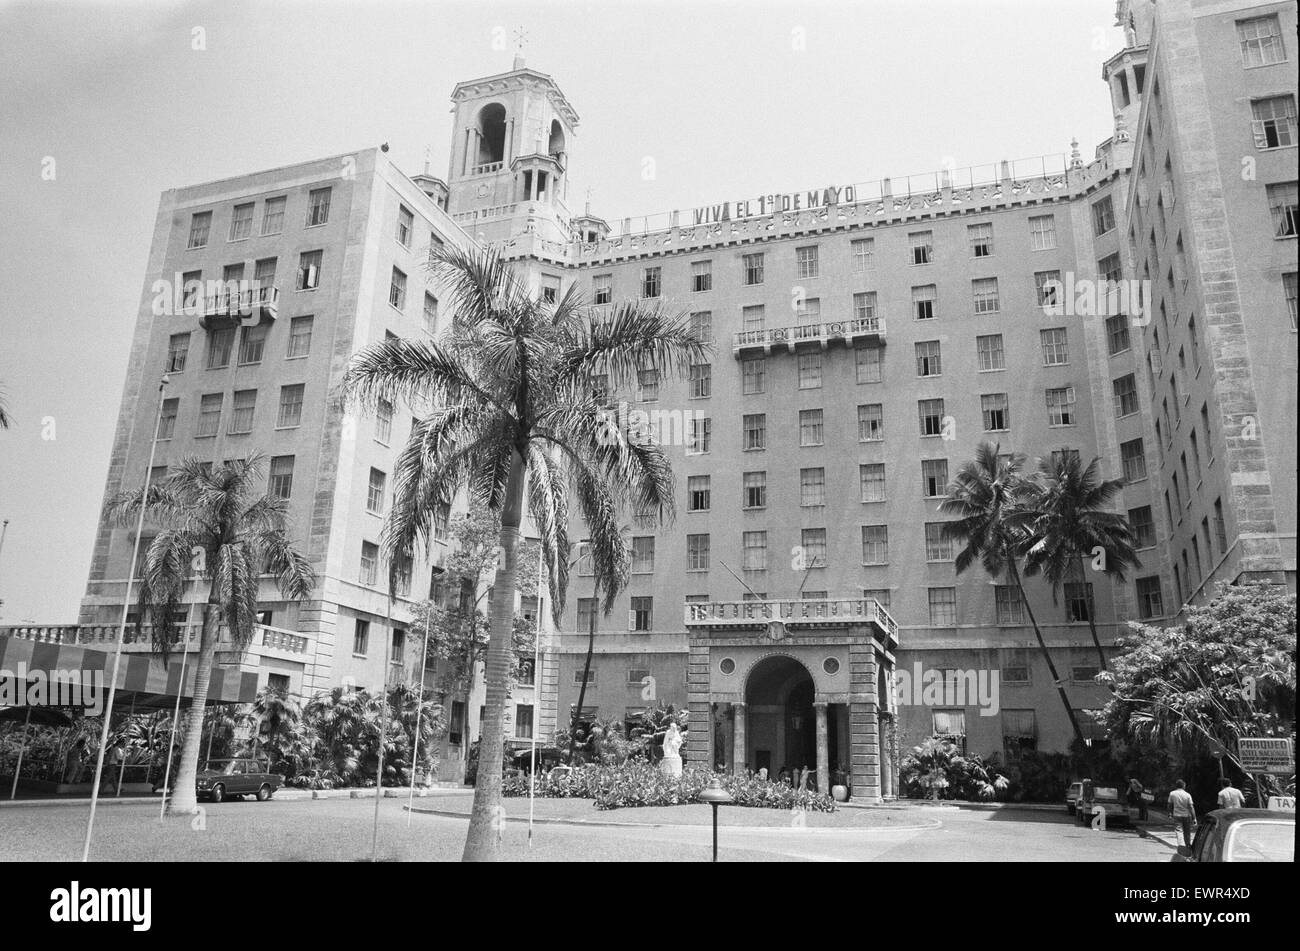 The Hotel Nacional de Cuba Havana, Cuba 21st May 1978 The hotel opened in 1930 and was popular with American tourists. During the Cuban missile crisis Fidel Castro and Che Guevara set up their headquarters here to prepare the defence of Havana from aerial Stock Photo